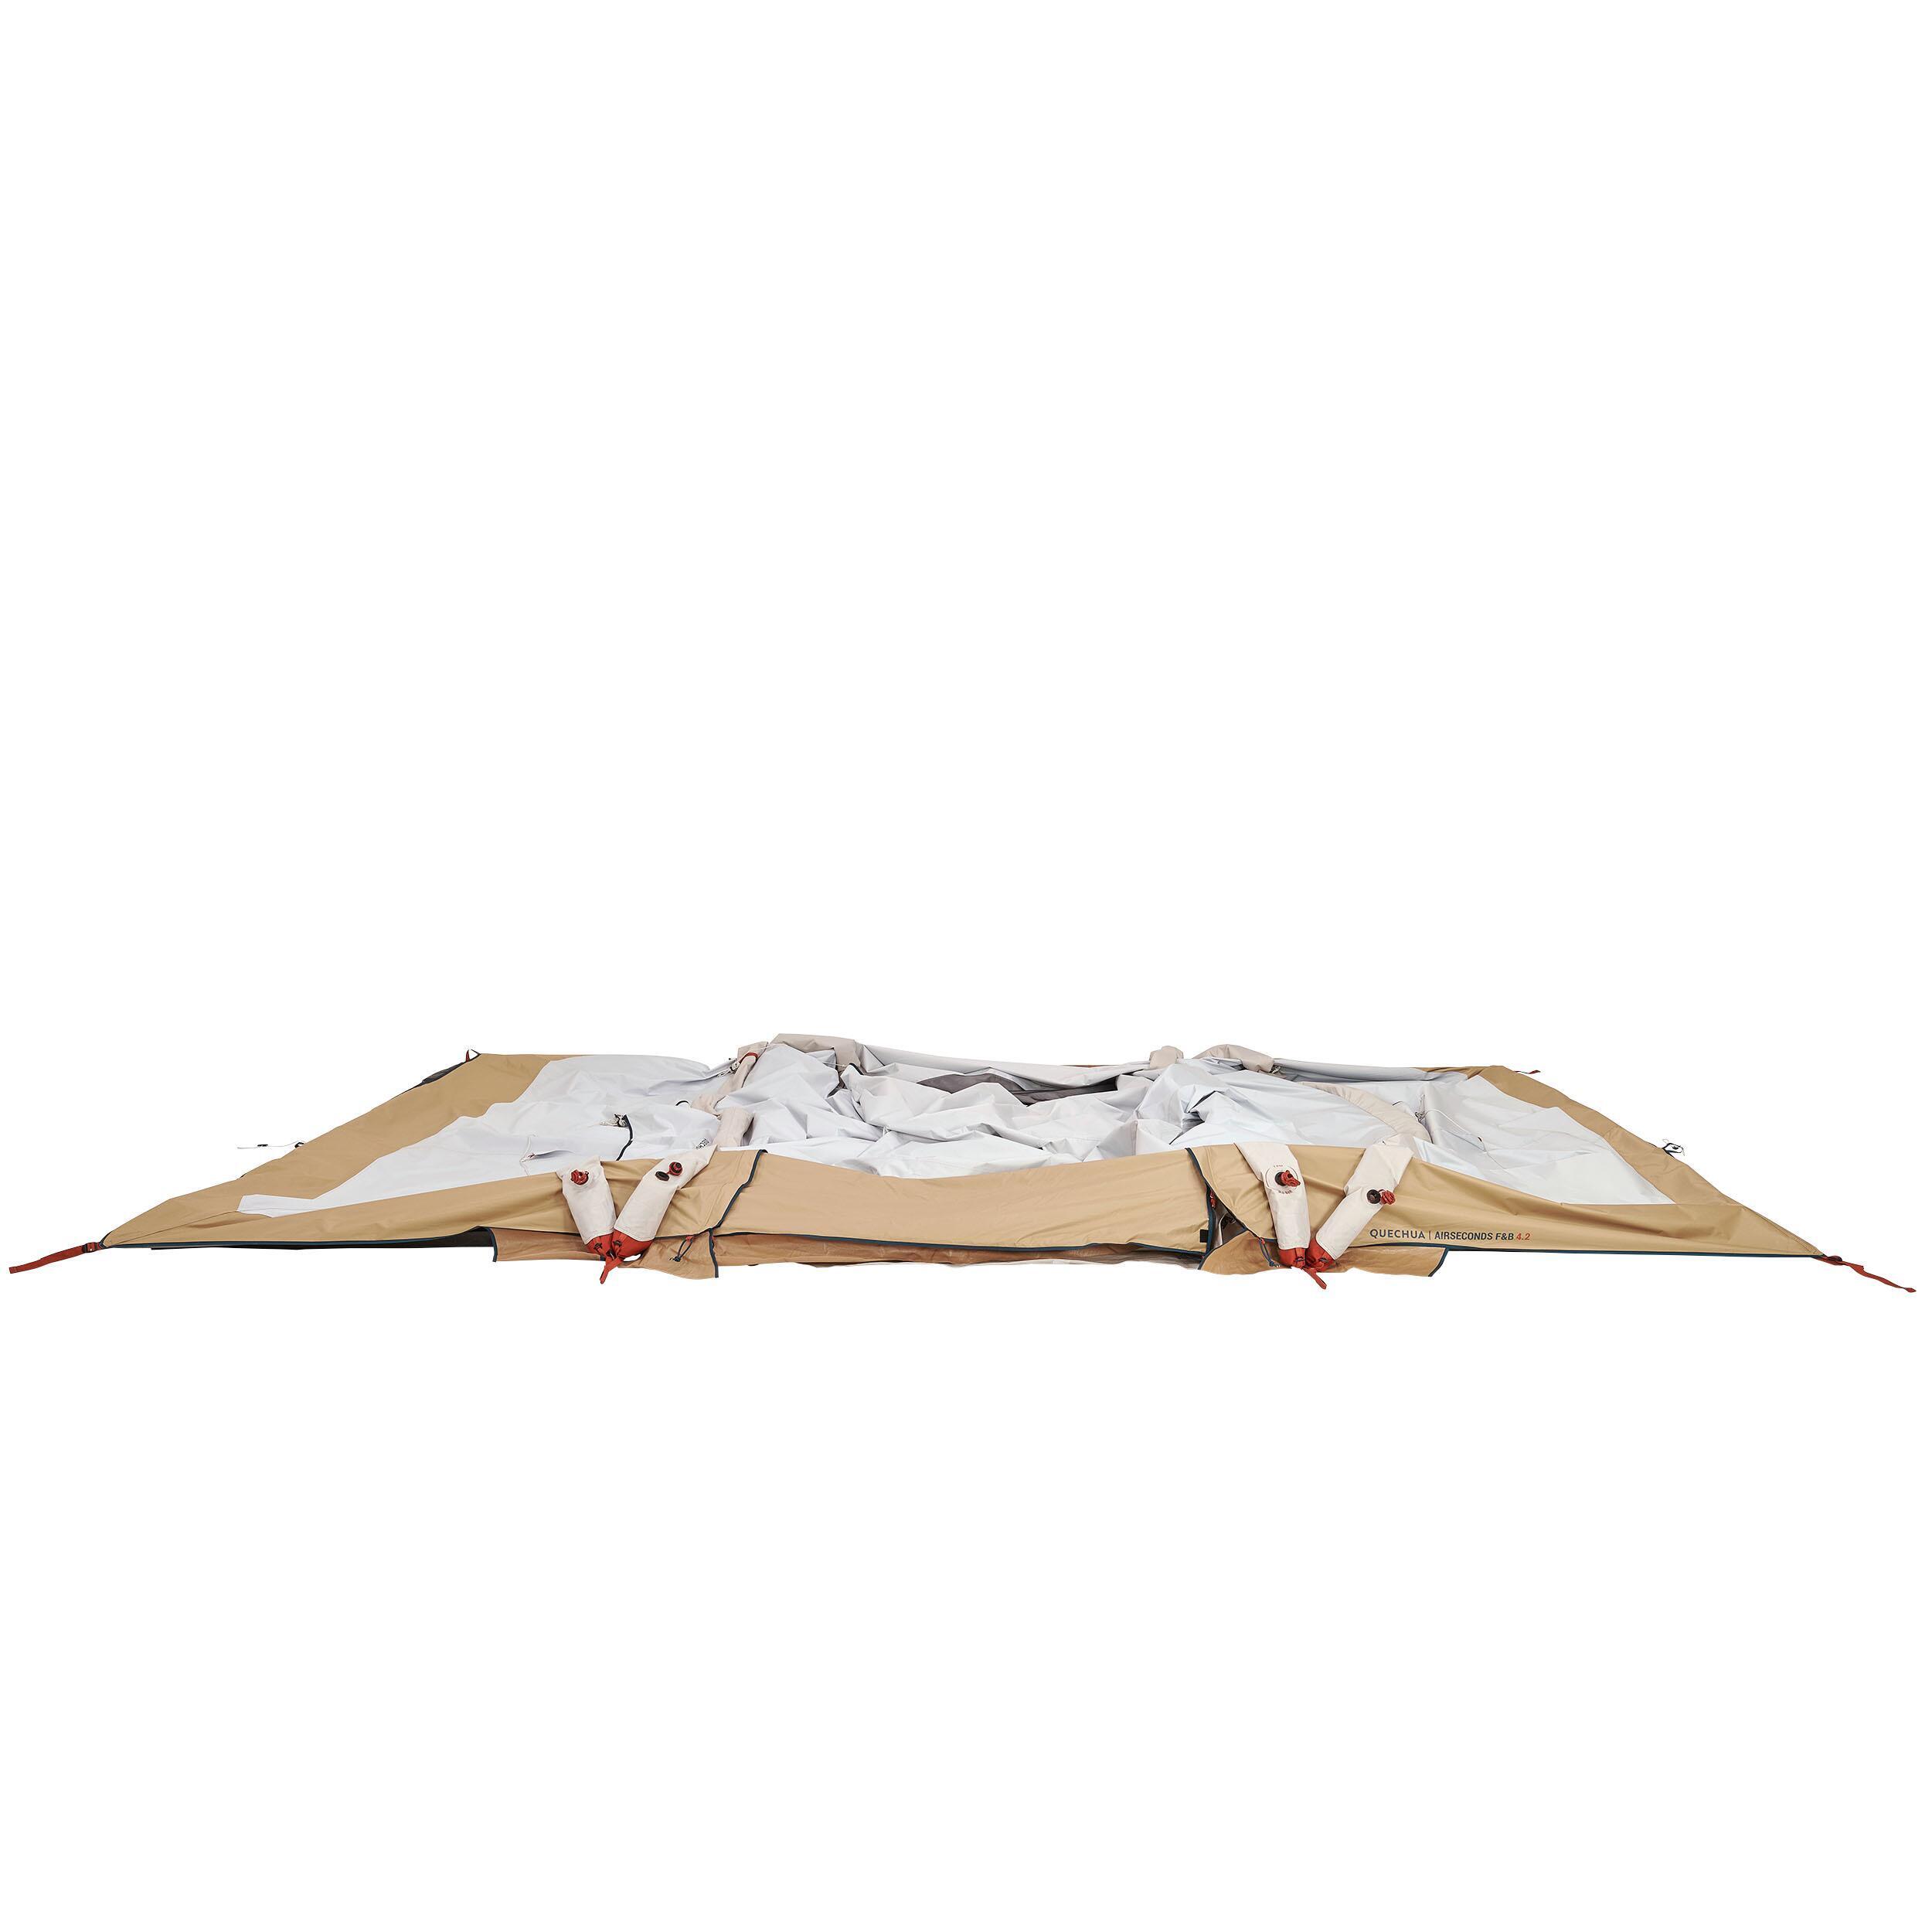 REFURBISHED FLYSHEET - SPARE PART FOR THE AIR SECONDS 4.2 TENT-A GRADE 4/5